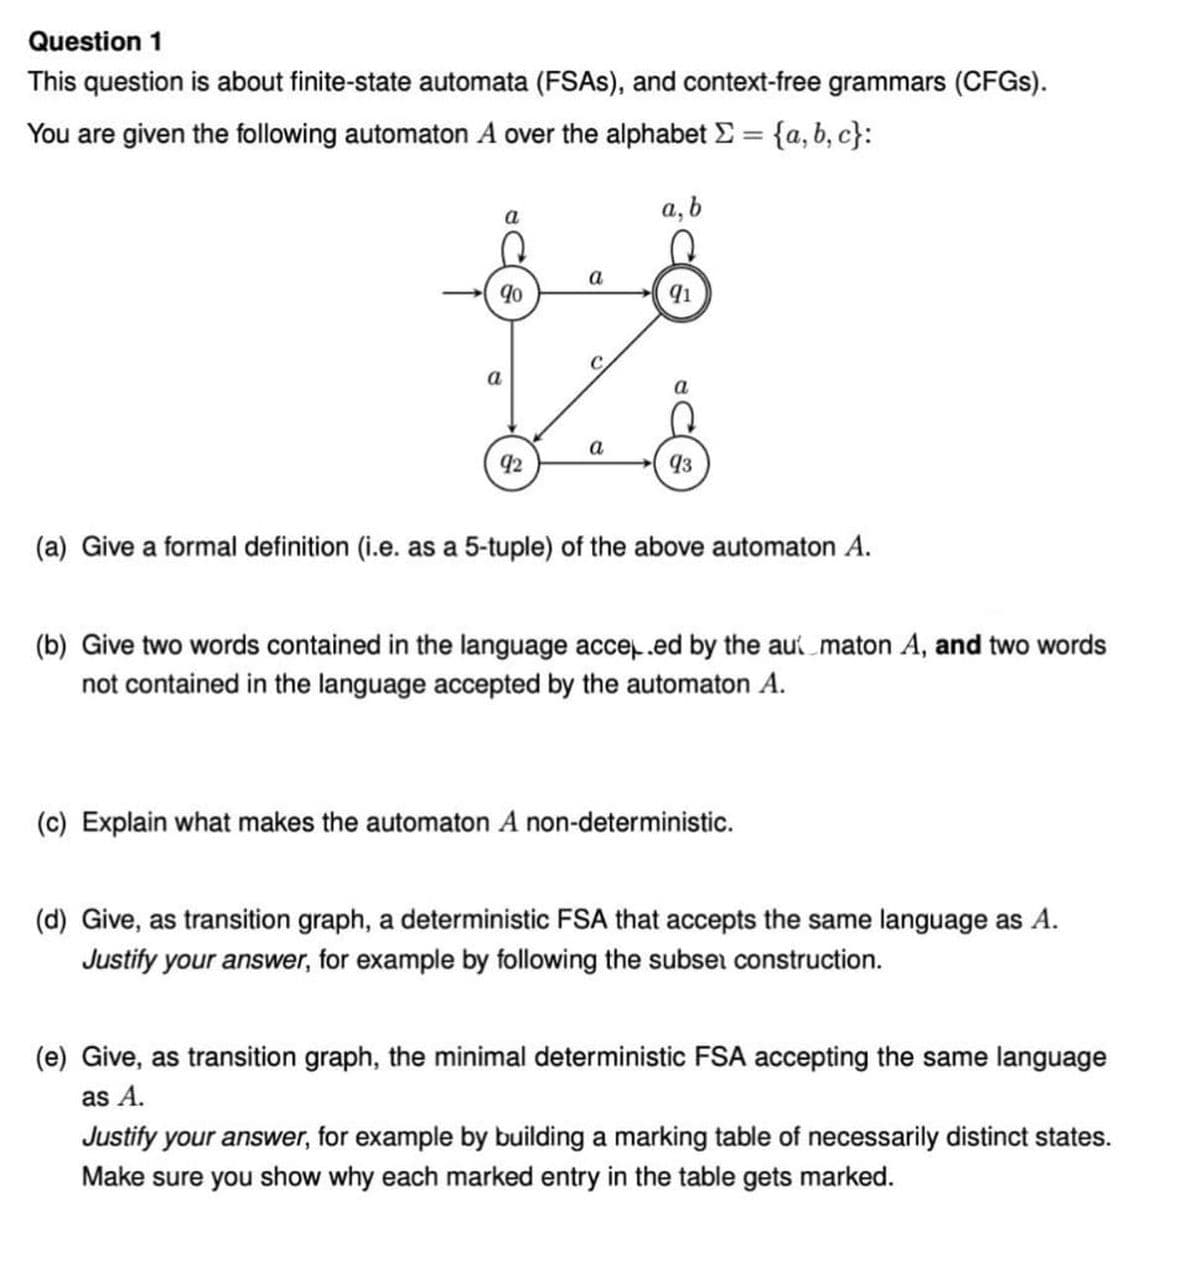 Question 1
This question is about finite-state automata (FSAS), and context-free grammars (CFGS).
You are given the following automaton A over the alphabet E = {a, b, c}:
%3D
a, b
a
a
91
a
a
42
93
(a) Give a formal definition (i.e. as a 5-tuple) of the above automaton A.
(b) Give two words contained in the language acce.ed by the au maton A, and two words
not contained in the language accepted by the automaton A.
(c) Explain what makes the automaton A non-deterministic.
(d) Give, as transition graph, a deterministic FSA that accepts the same language as A.
Justify your answer, for example by following the subser construction.
(e) Give, as transition graph, the minimal deterministic FSA accepting the same language
as A.
Justify your answer, for example by building a marking table of necessarily distinct states.
Make sure you show why each marked entry in the table gets marked.
